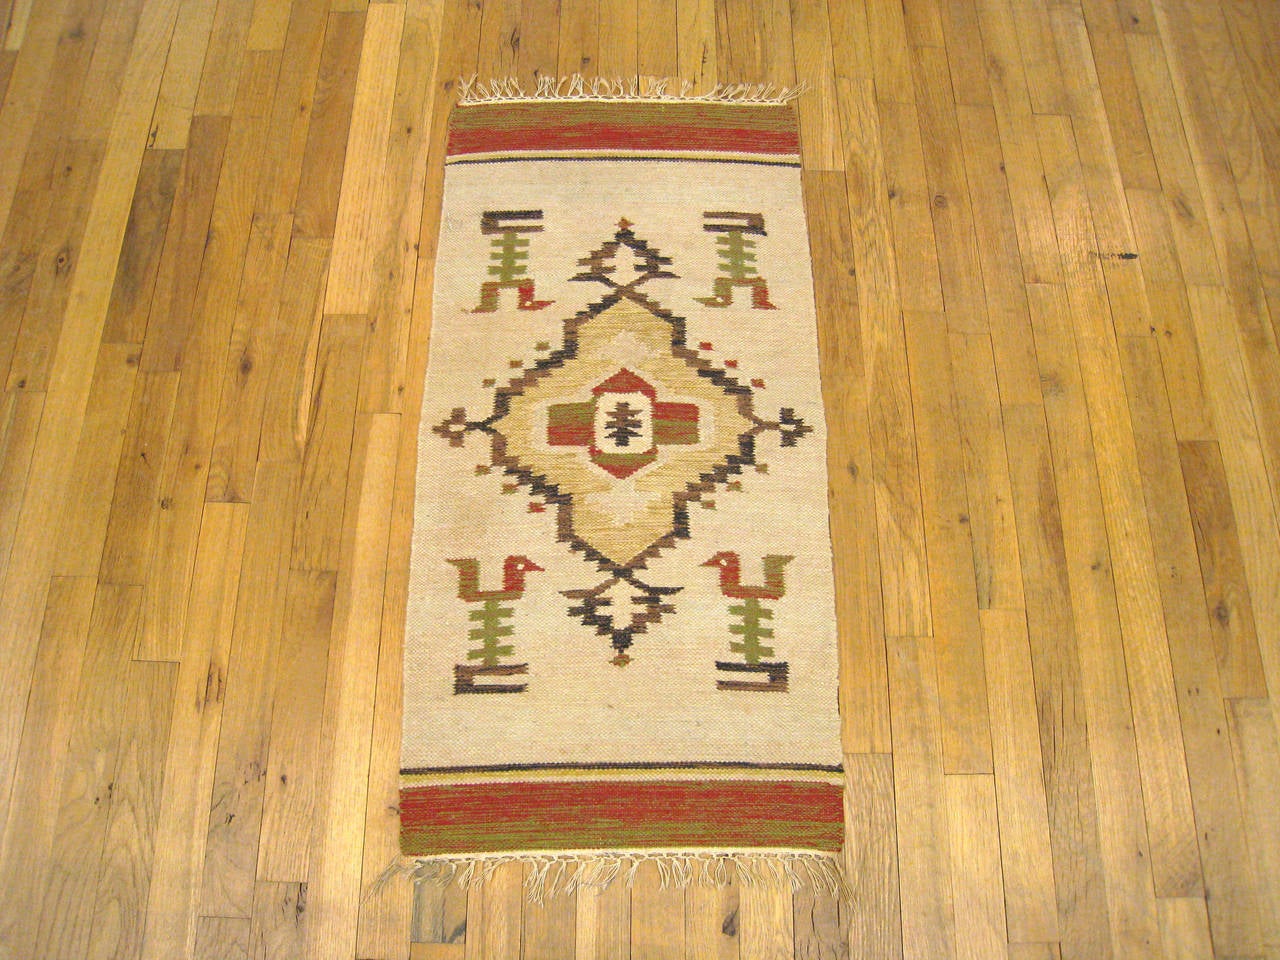 A vintage decorative rug from the Zapotec Indian tribe in Oaxaca, Mexico, size 3'3 x 1'8, featuring a central medallion on an unfussy beige field, with four stylized bird motifs standing at each of the four corners. The main field is bordered on